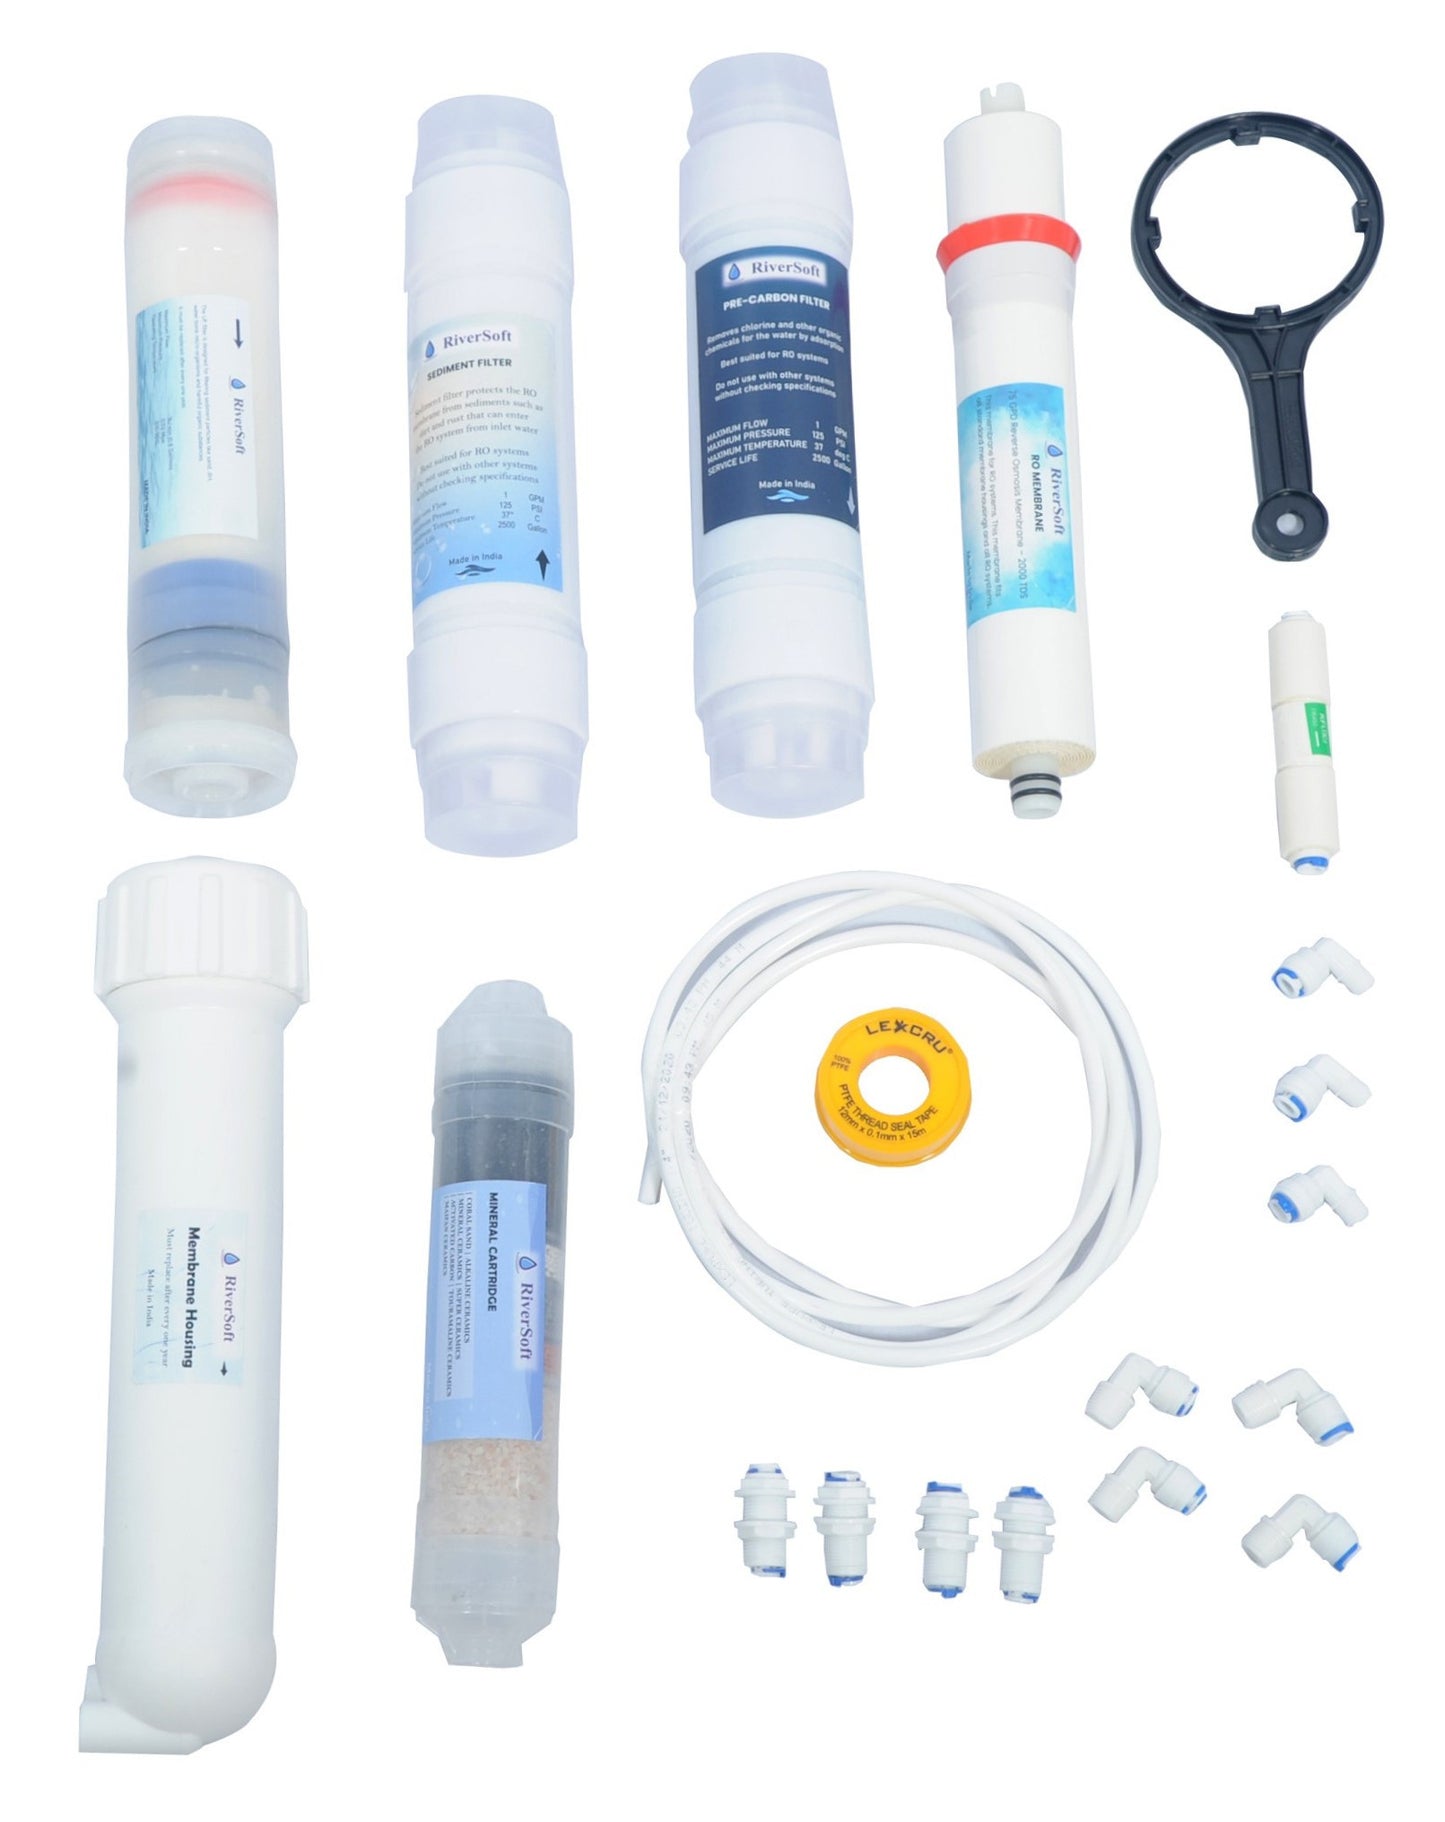 RO-Pure RO Water Purifier spare parts | Complete set | 75 GPD Membrane | Mineral Cartridge | UF Filter | Sediment Filter | Pre-Carbon Filter | FR-450 RO Flow Restrictor